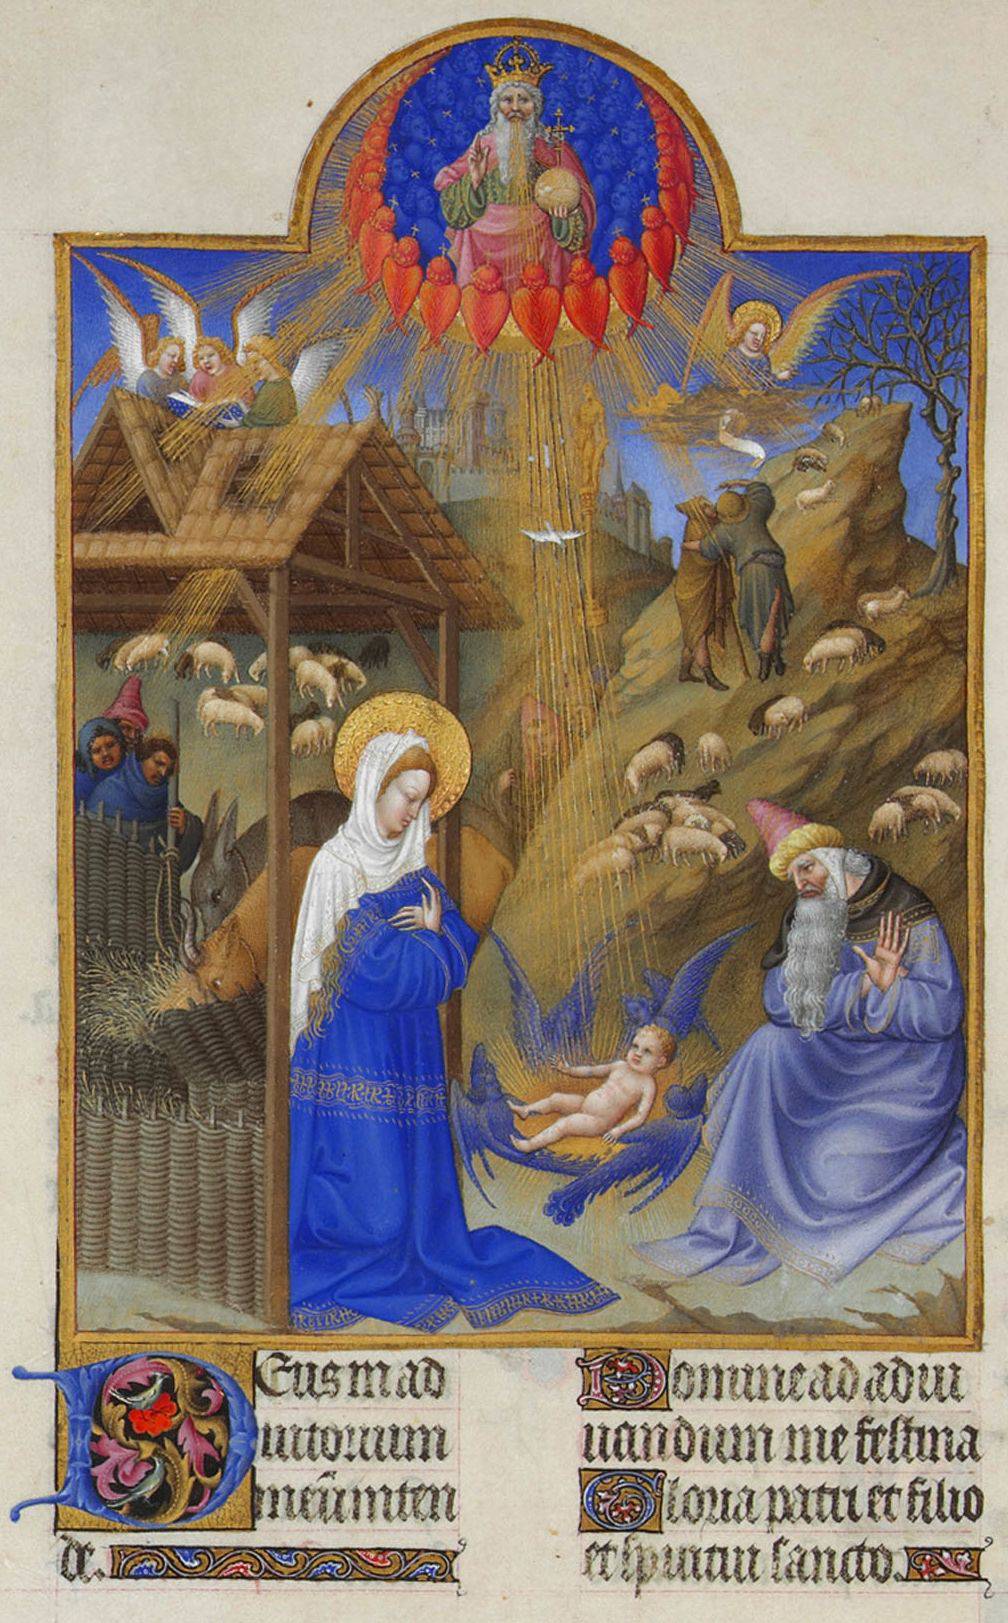 Christmas, far from being celebrated on a single day, covered twelve, from December 25th to January 6th, the feast of the Epiphany (our Three King’s Day).